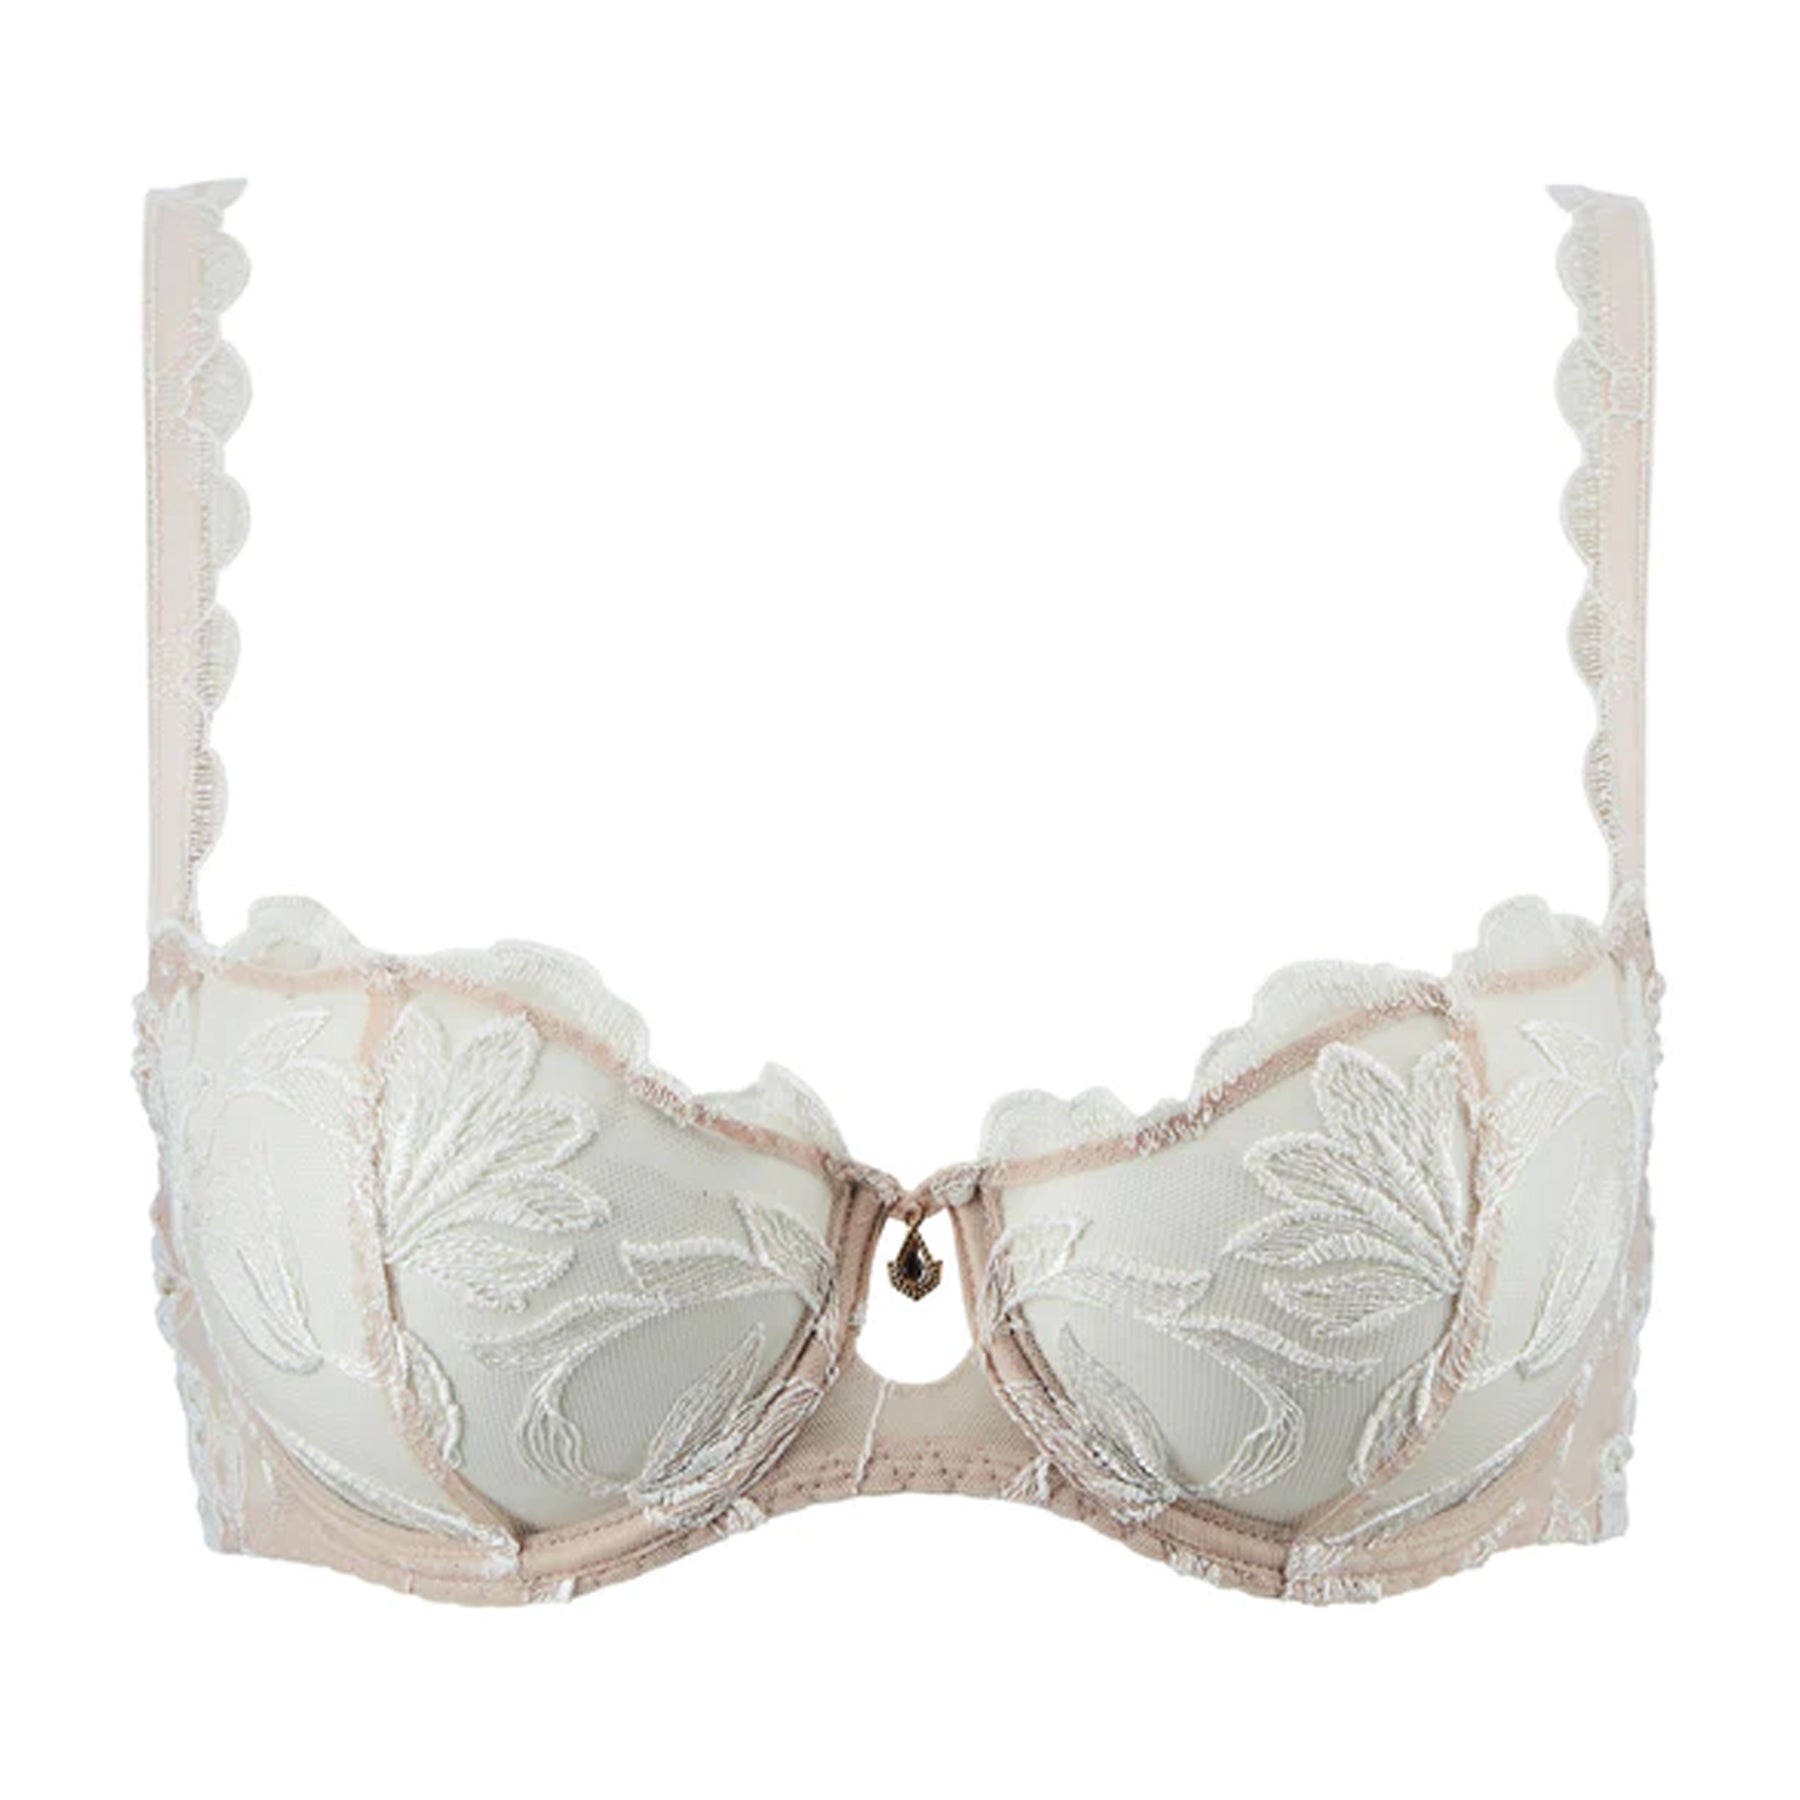 Delicate matters: how to care for bras and lingerie, Lingerie